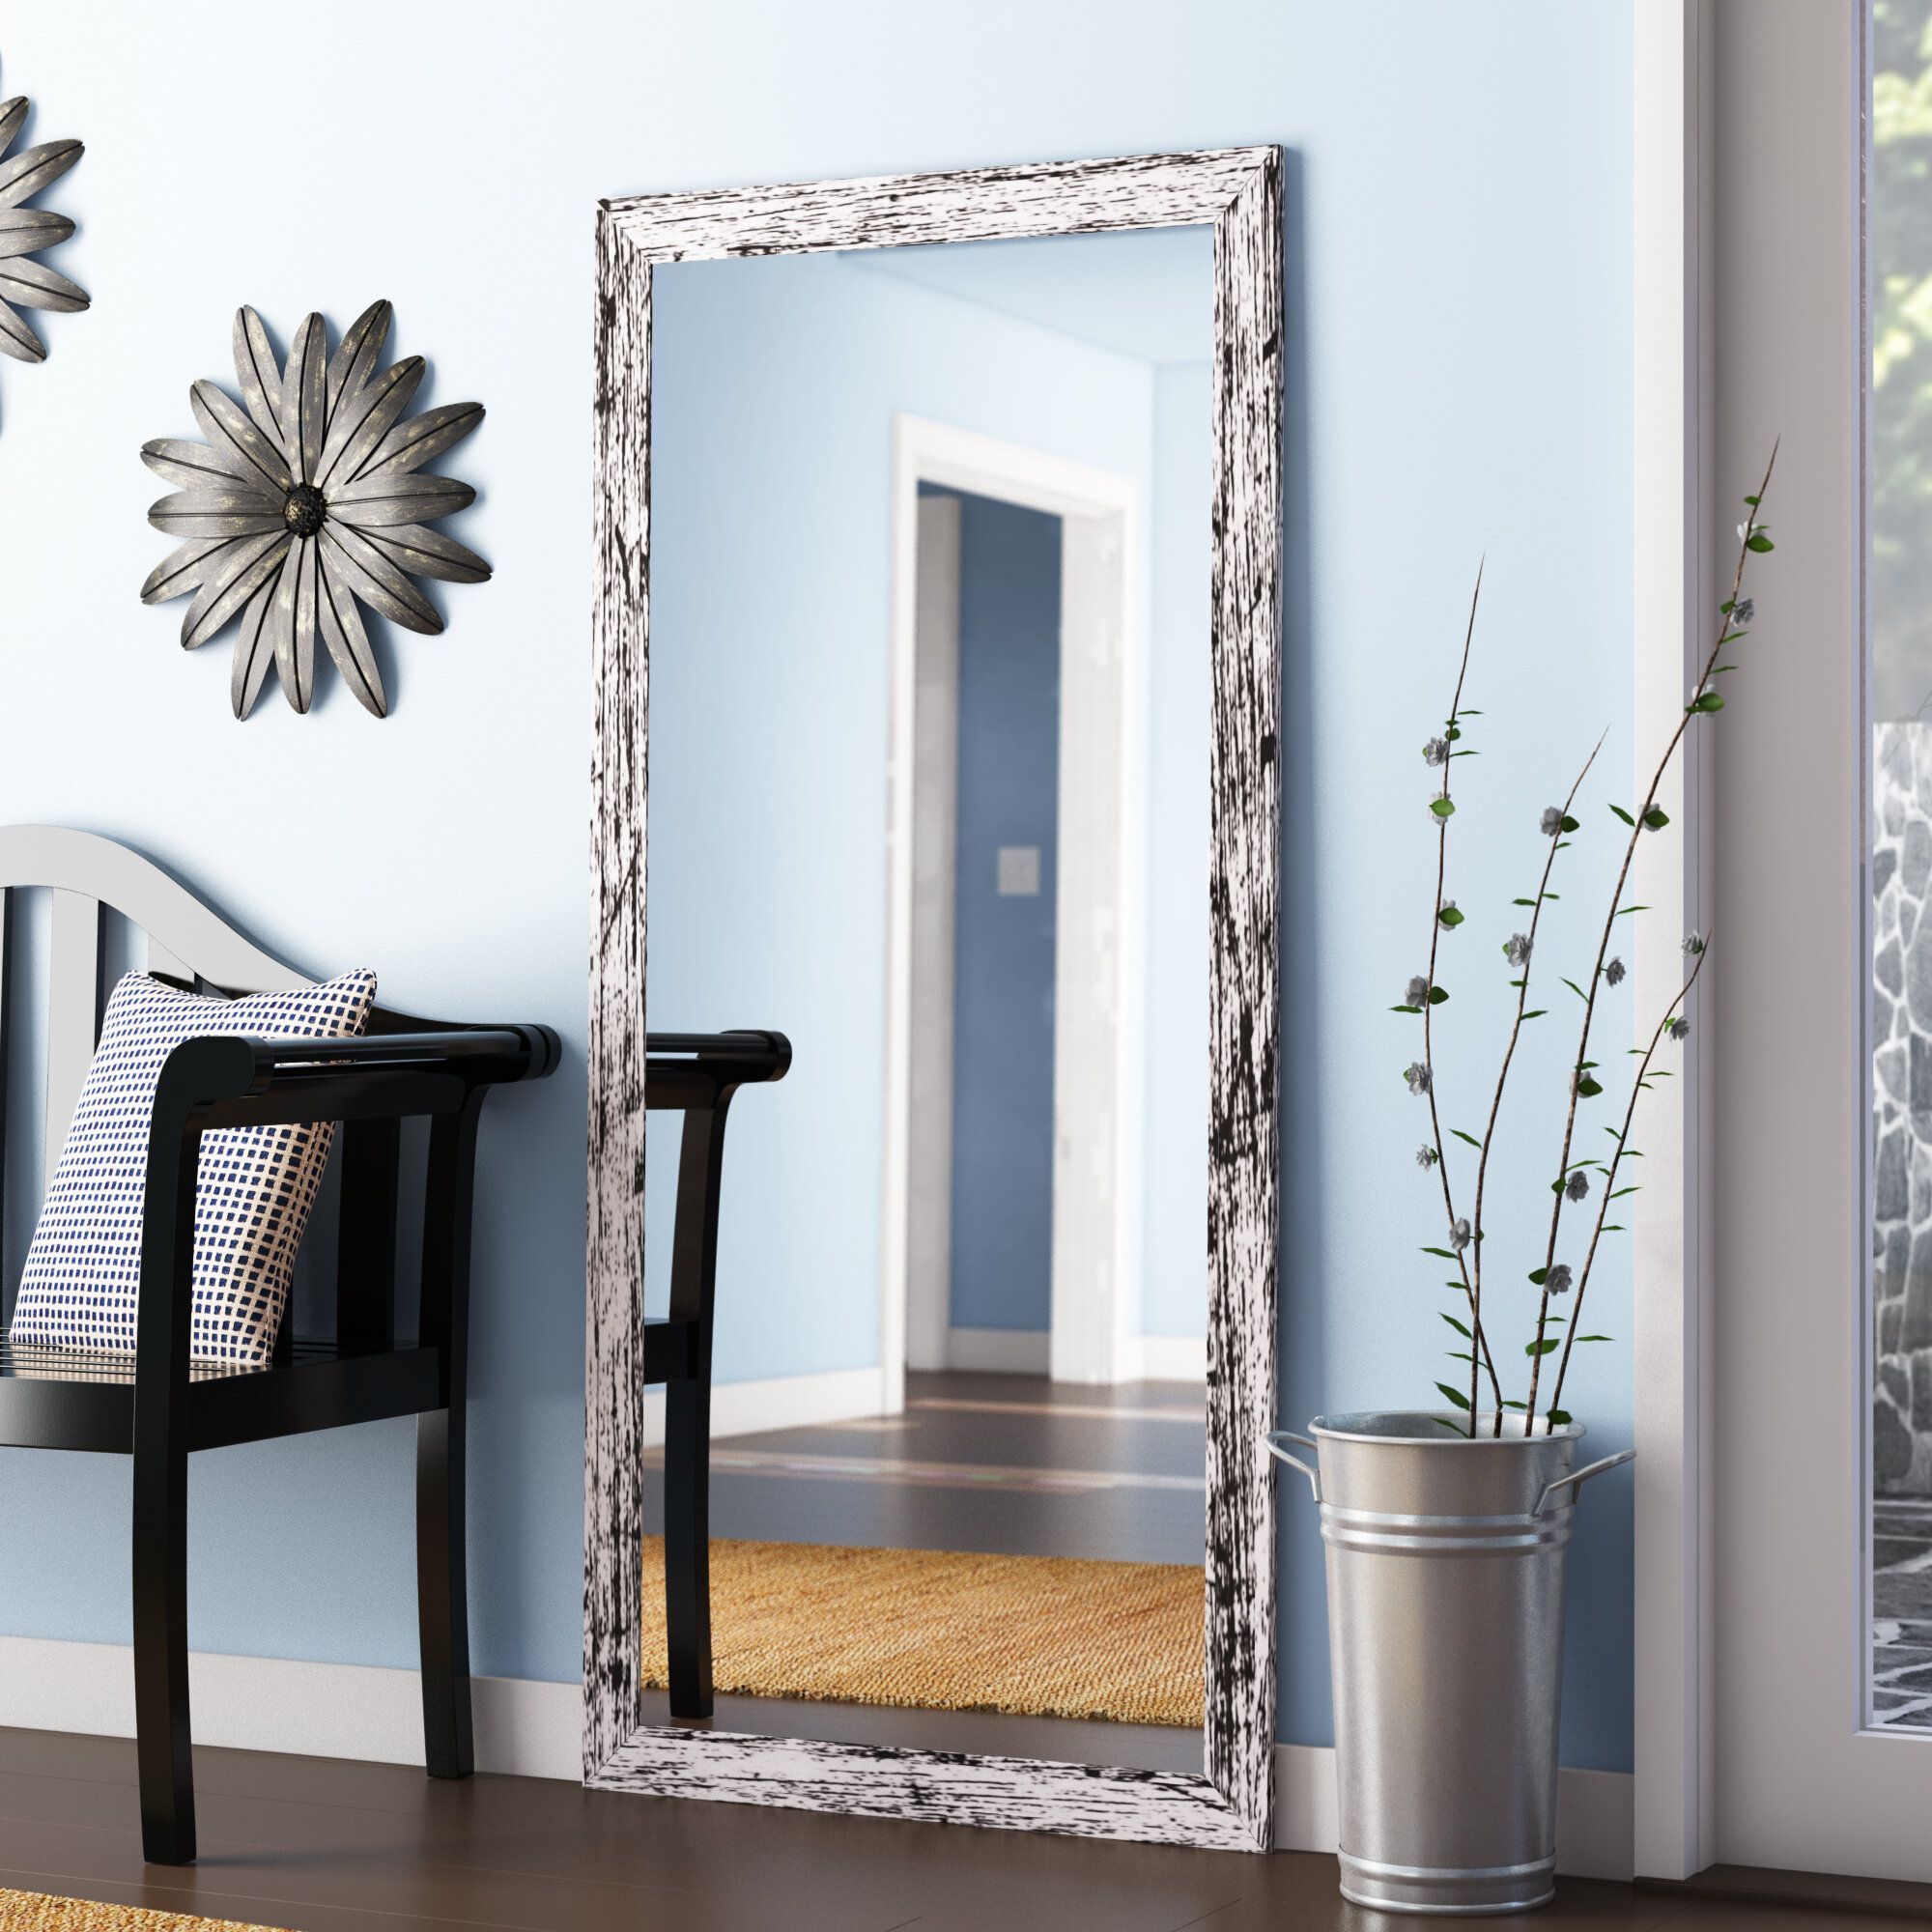 Decorating With Floor Mirrors